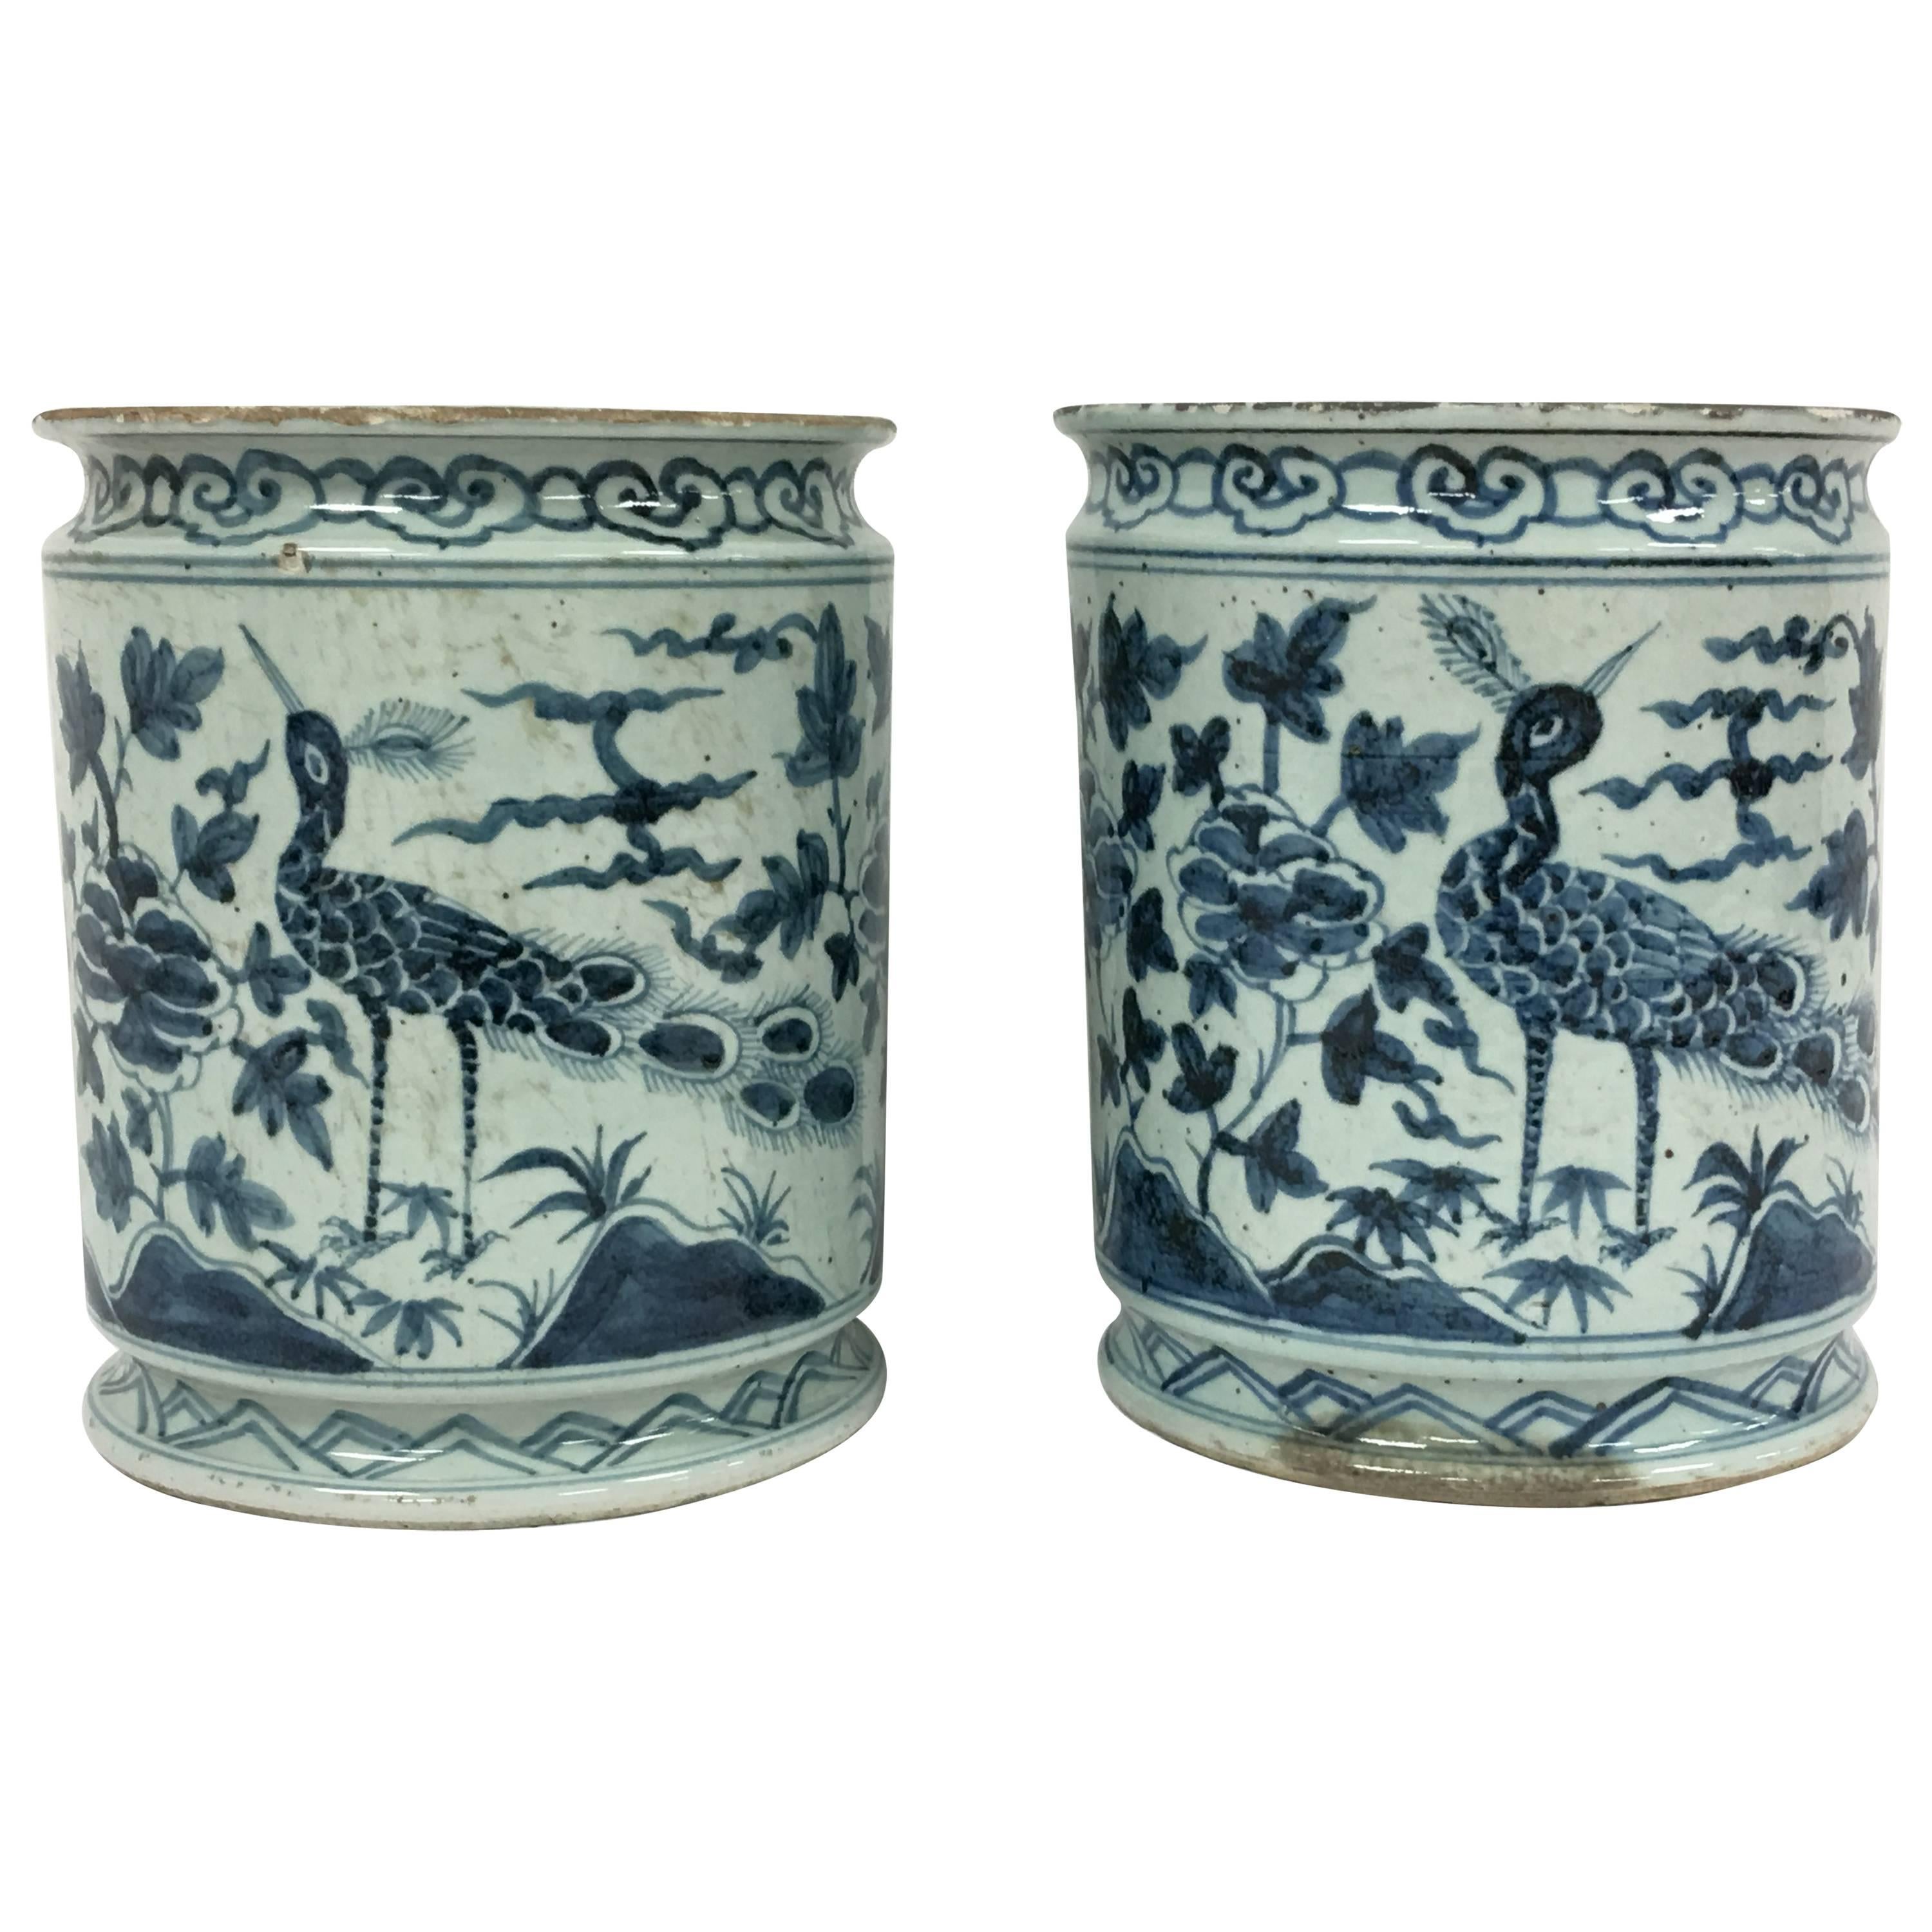 Pair of Blue and White Asian Peacock Planters